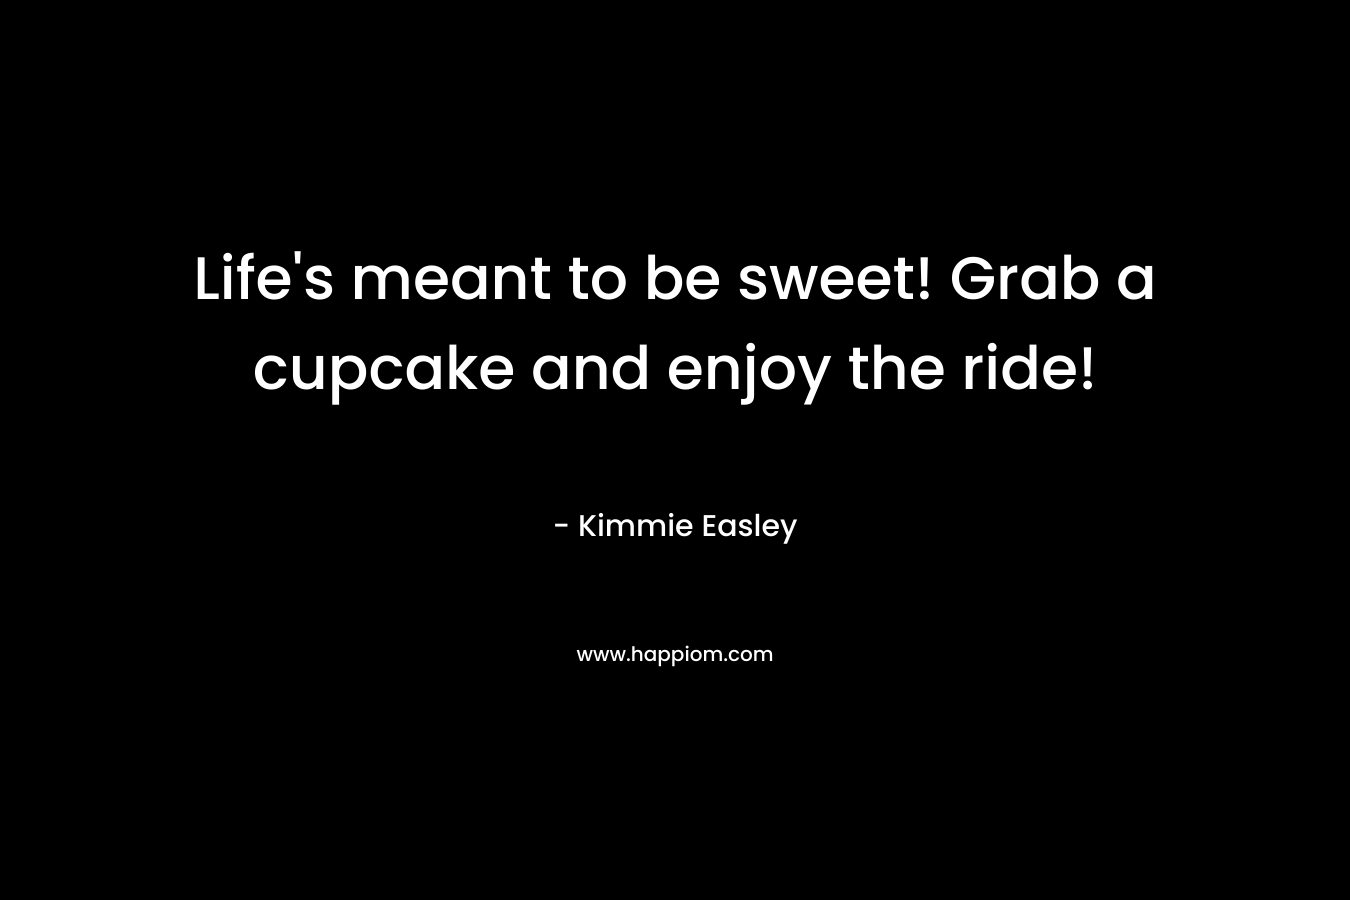 Life's meant to be sweet! Grab a cupcake and enjoy the ride!